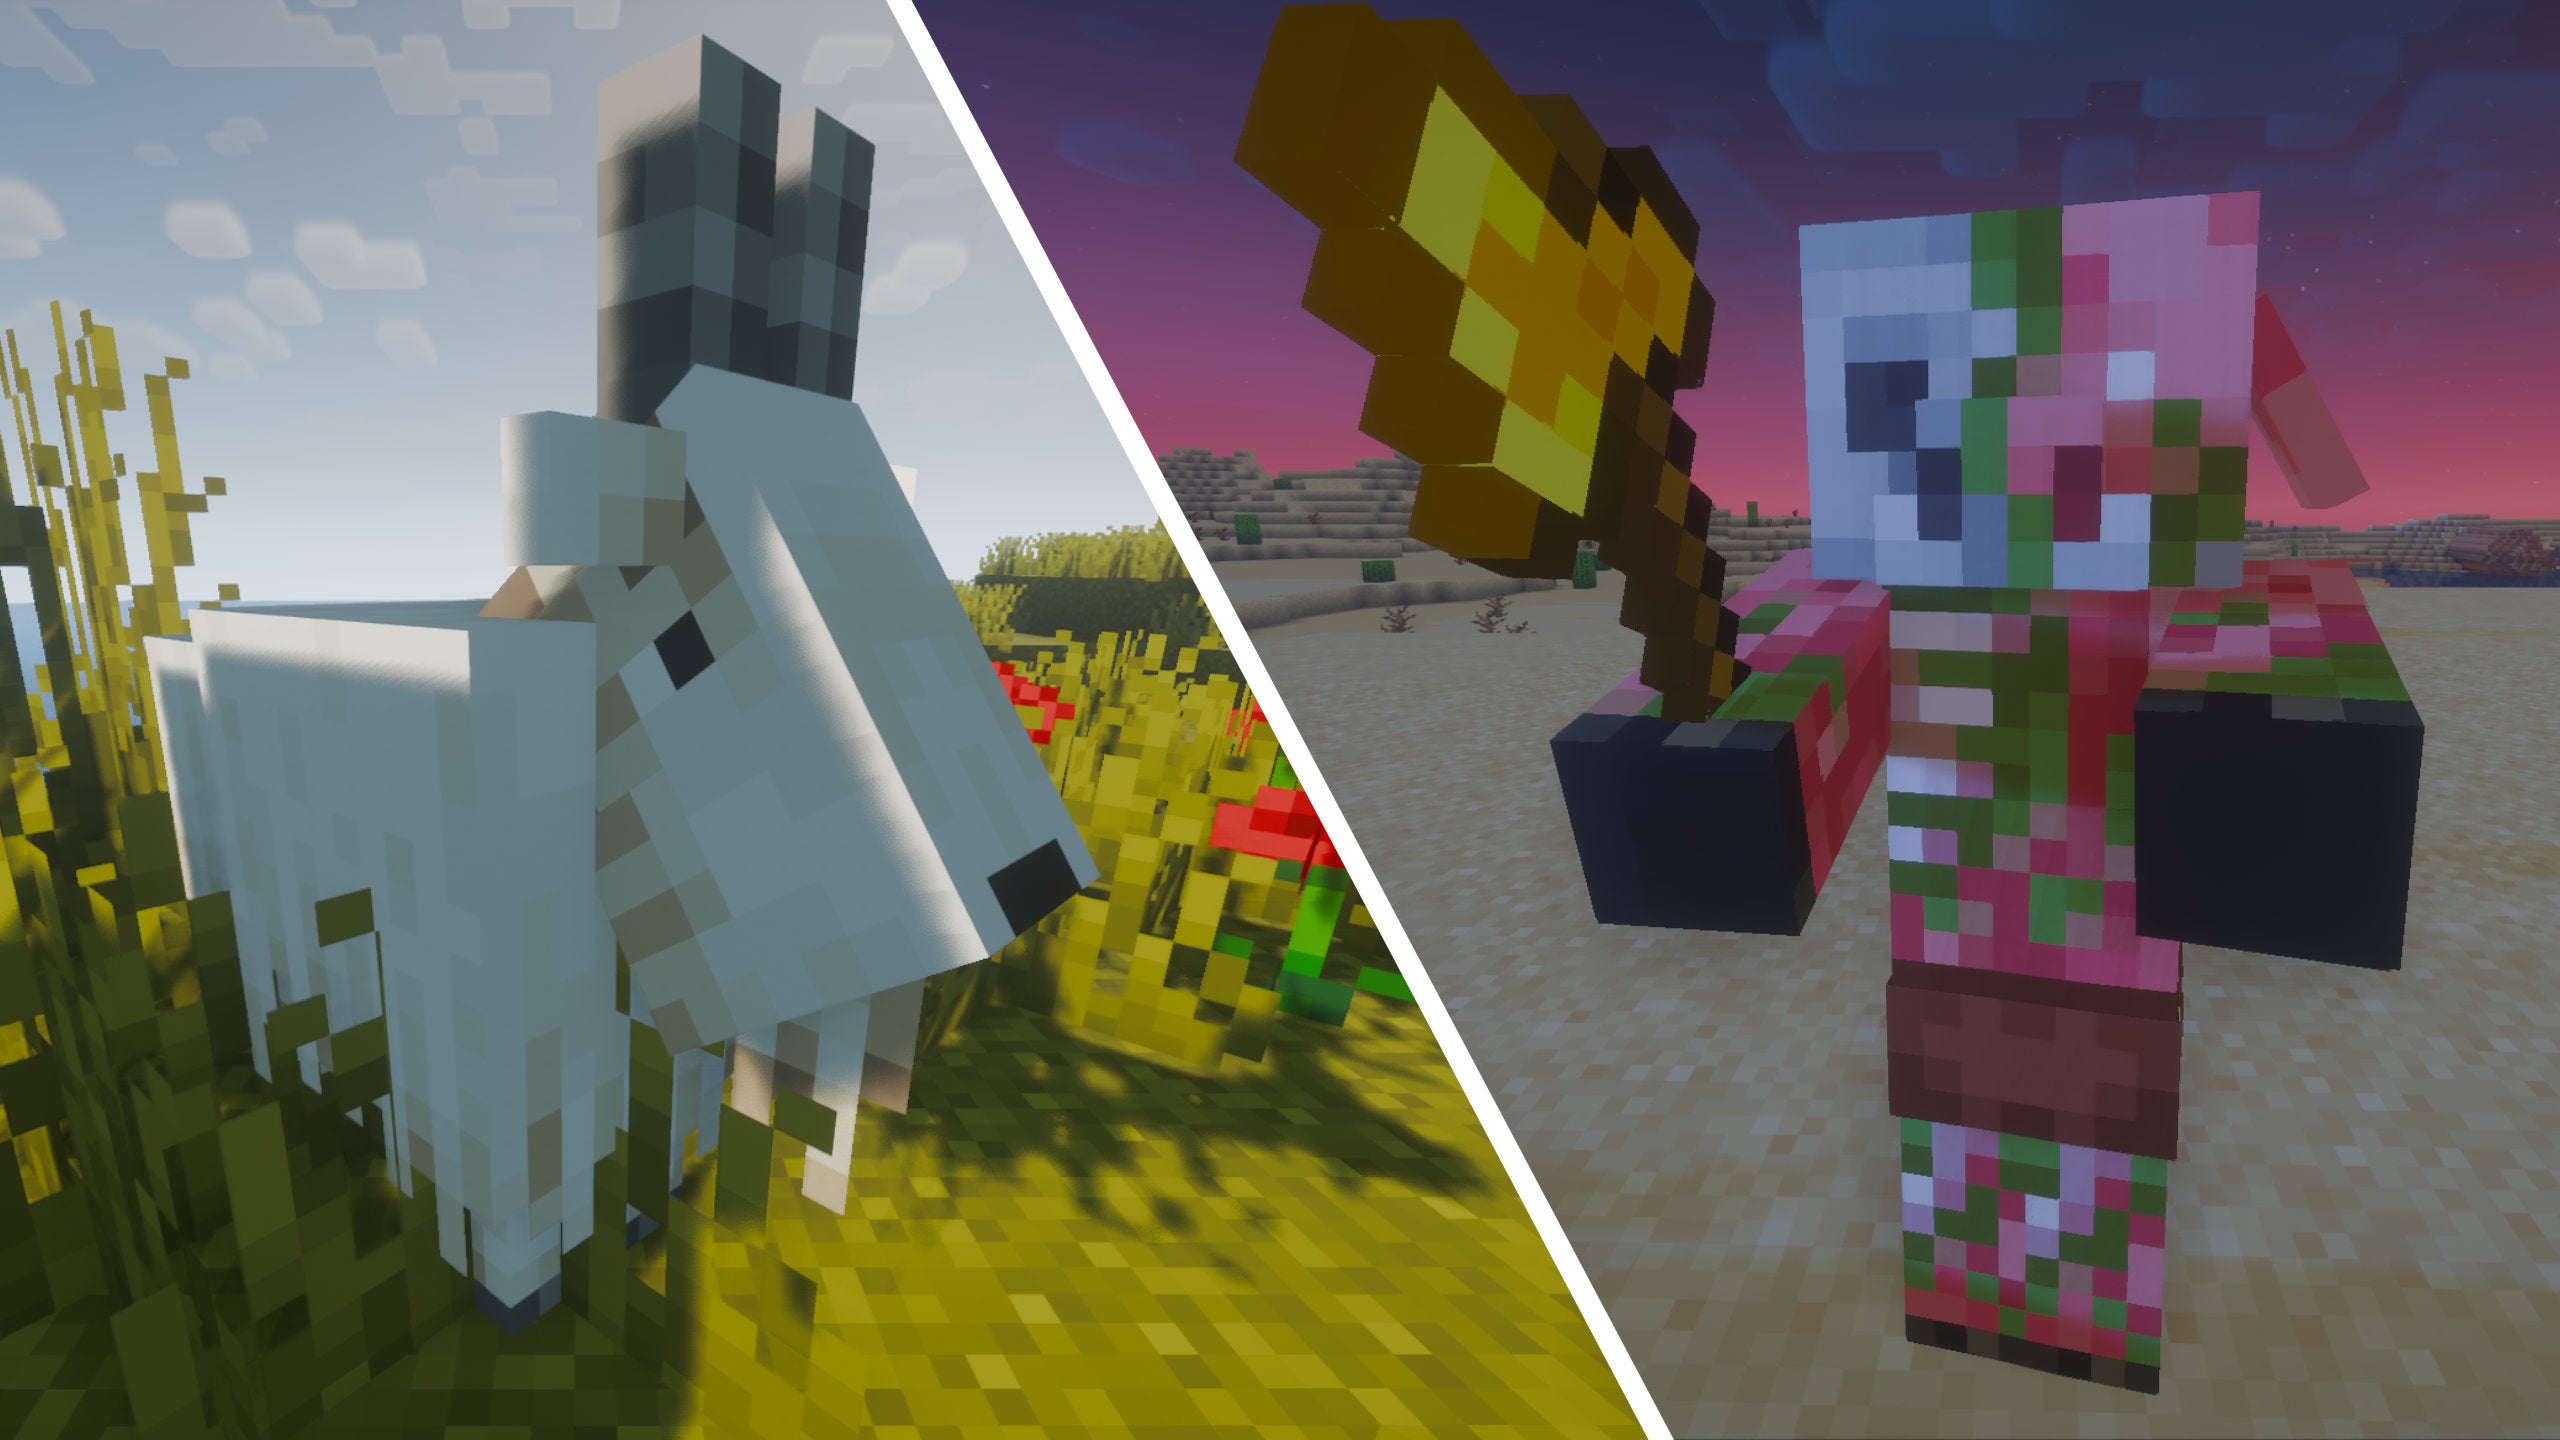 A composite image of two Minecraft mobs: on the left is a goat in a grassland biome during the day, and on the right is a Piglin Brute in a desert biome at night.